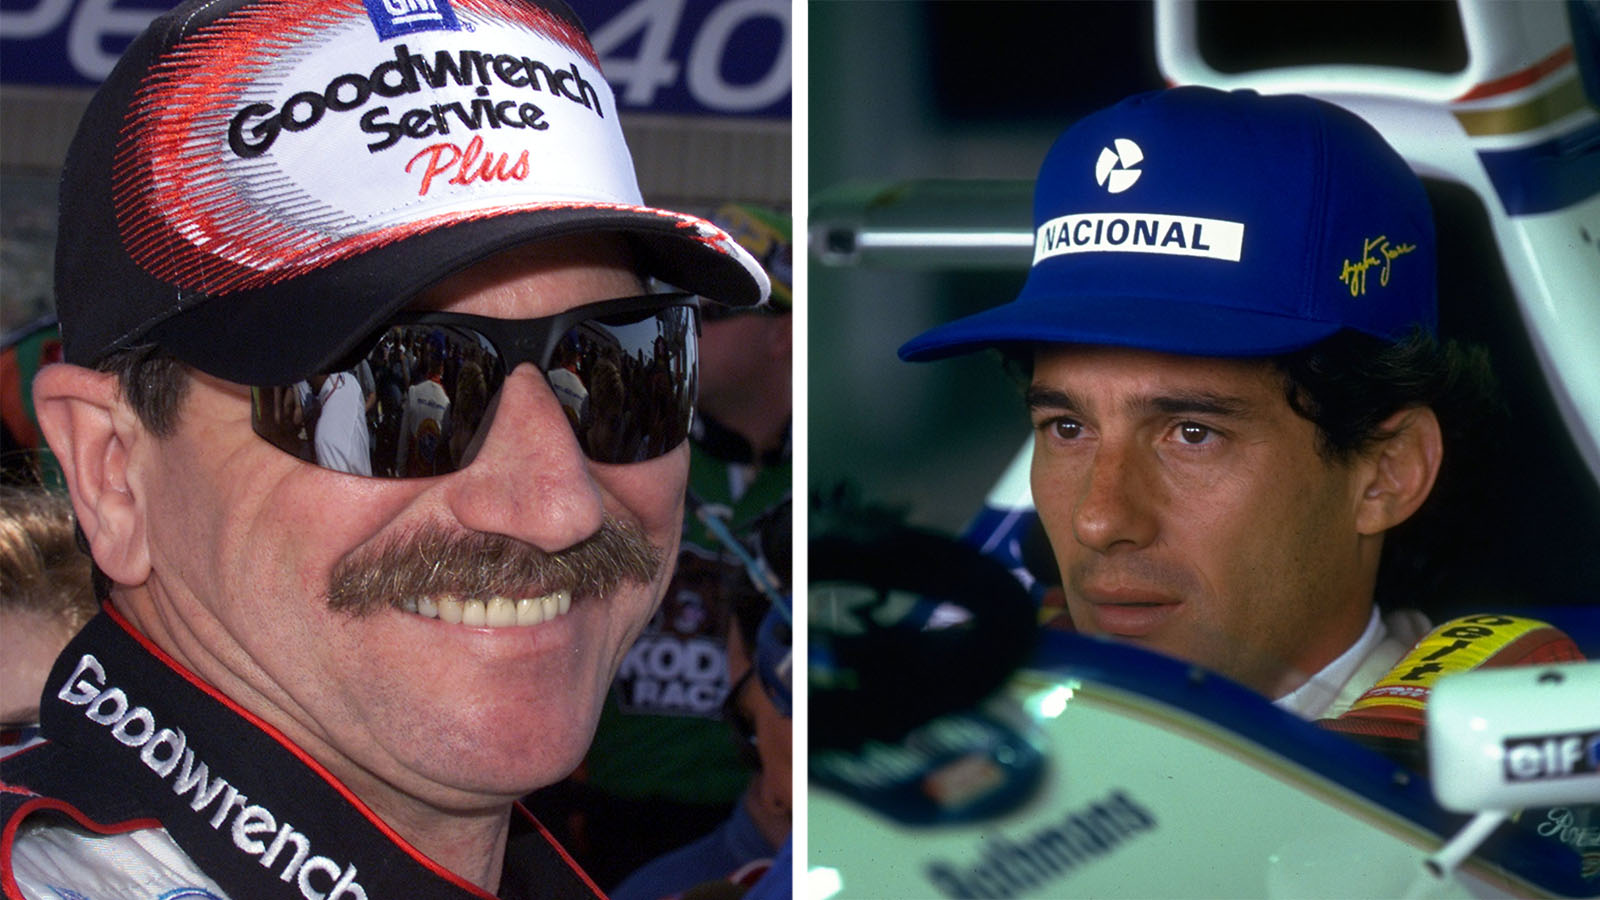 Dale Earnhardt, Ayrton Senna still sorely missed 23 years later